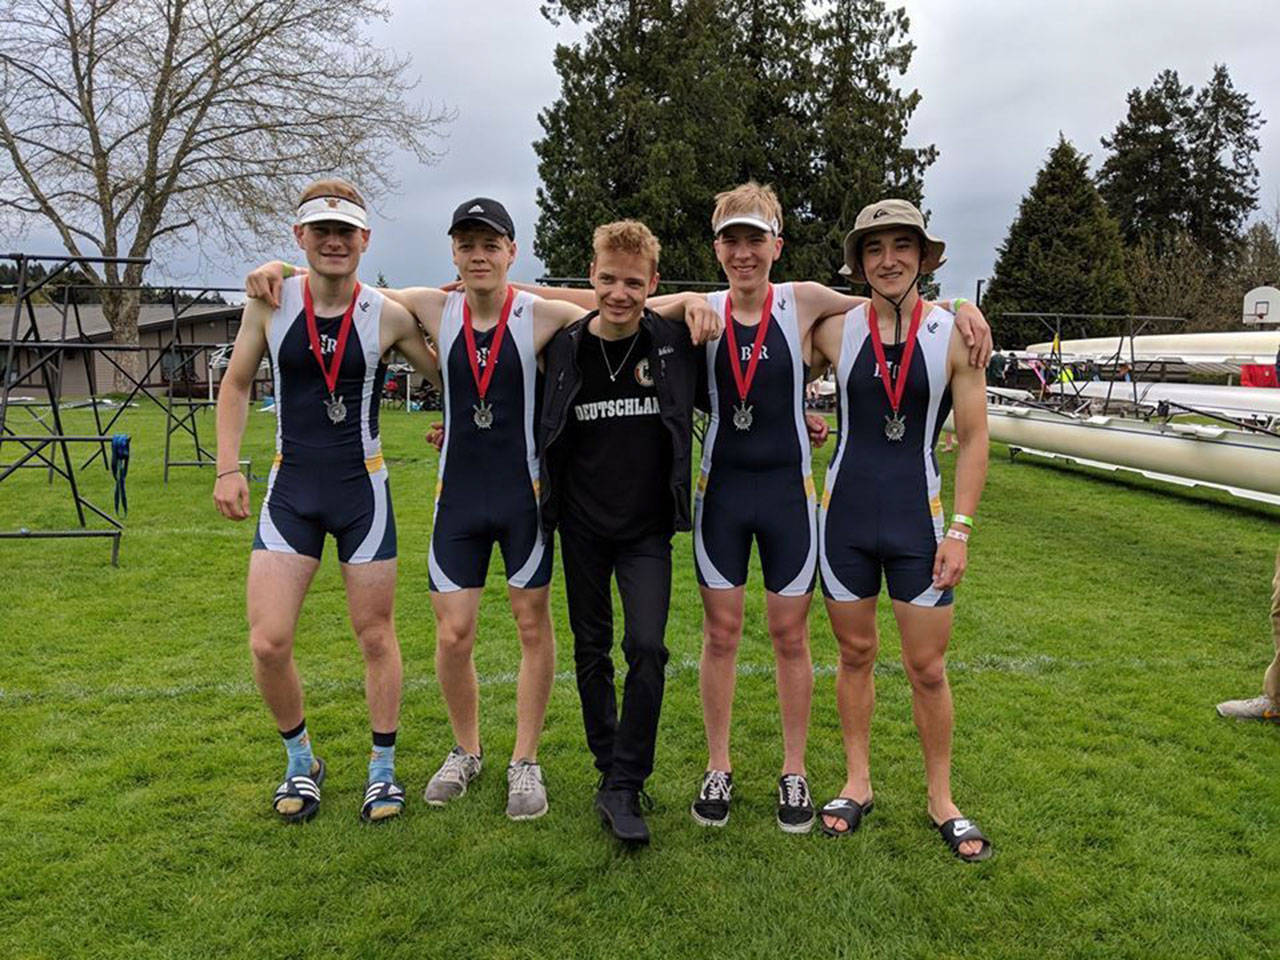 Photo courtesy of Ann Livengood | The Bainbridge Island Rowing Under 19 Men 4+ team: N. Faust, J. Philip, H. Dore, C. Lindquist and N. Sublett (cox), who brought home a Silver Medal from the recent Brentwood Regatta.